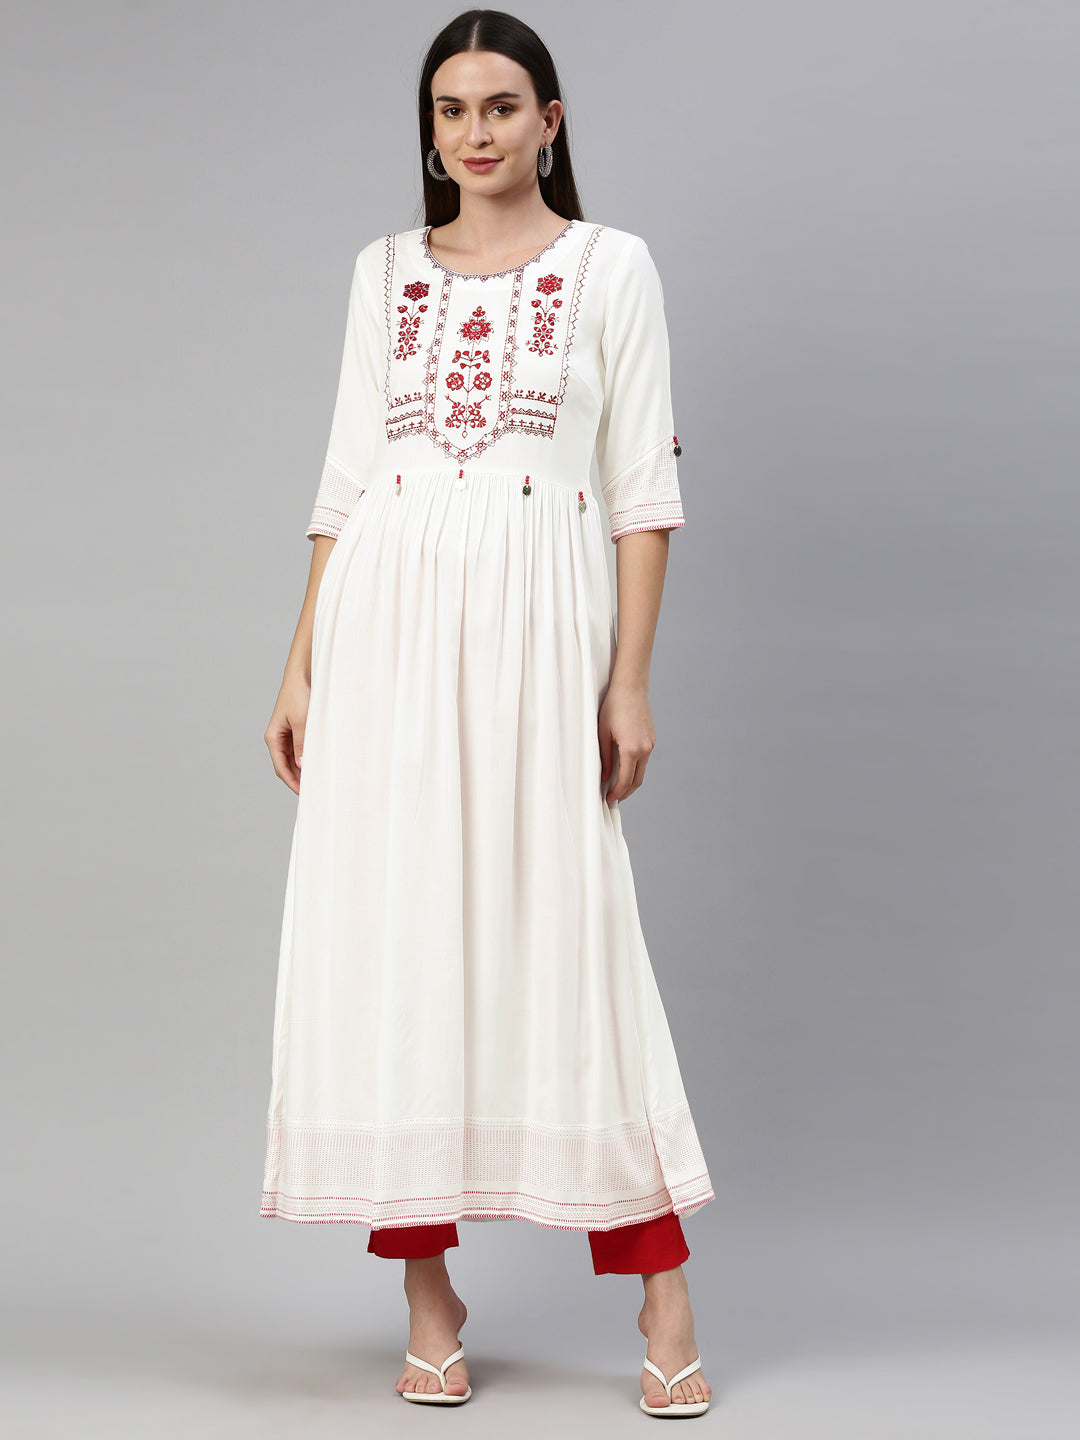 Ladies cotton Kurtis at Rs.2399/Piece in nizamabad offer by Neerus